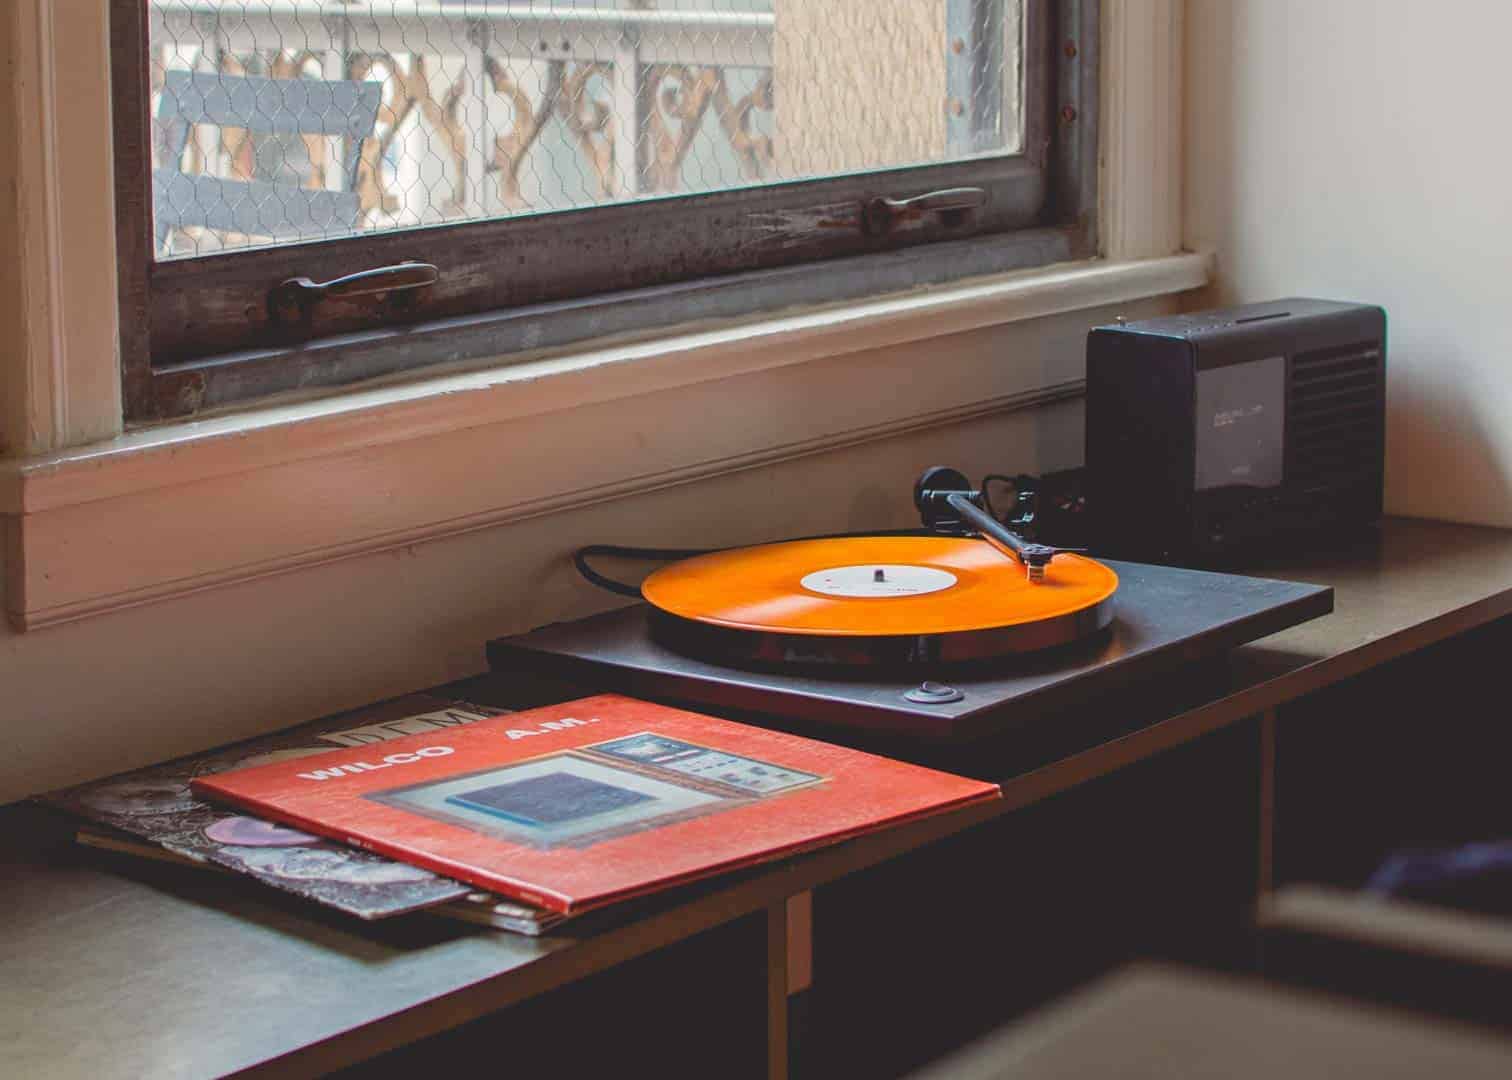 What is a vinyl record?